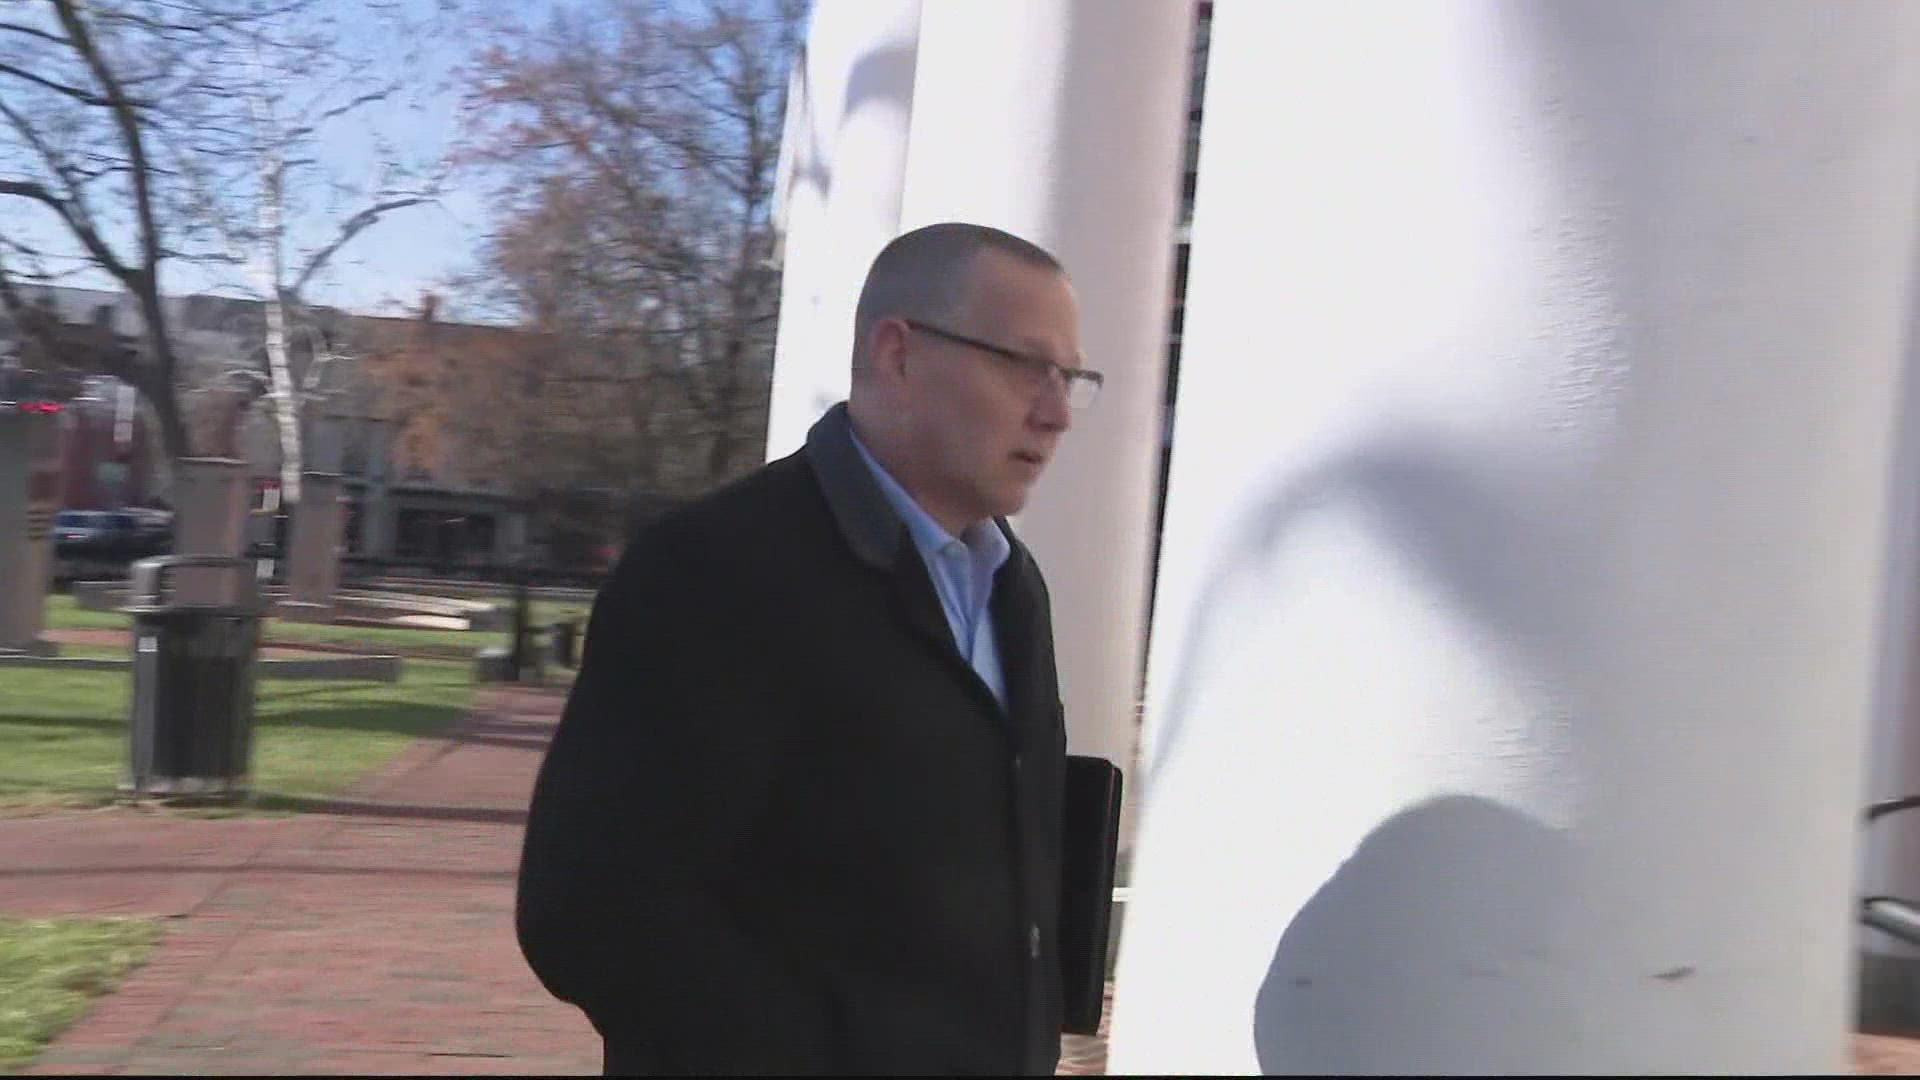 Dr. Scott Ziegler is working to dismiss charges against him for how he handled a months-long investigation into sexual assaults.